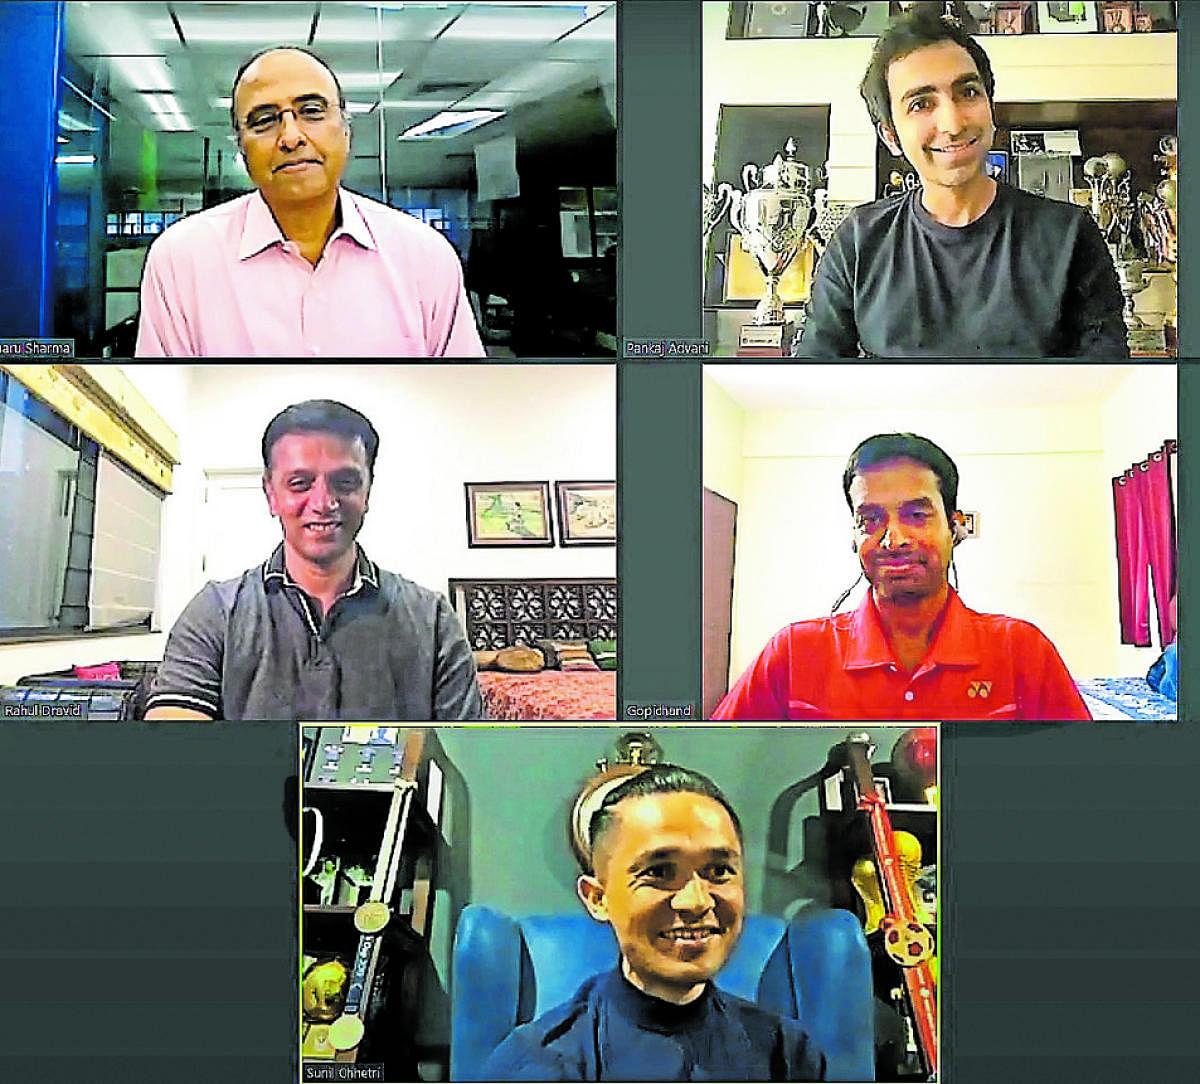 Clocwise (from top right) Cue sports ace Pankaj Advani, badminton great P Gopichand, footballing hero Sunil Chhetri and cricket legend Rahul Dravid during the Deccan Herald webinar series DH Sparks moderated by Charu Sharma.